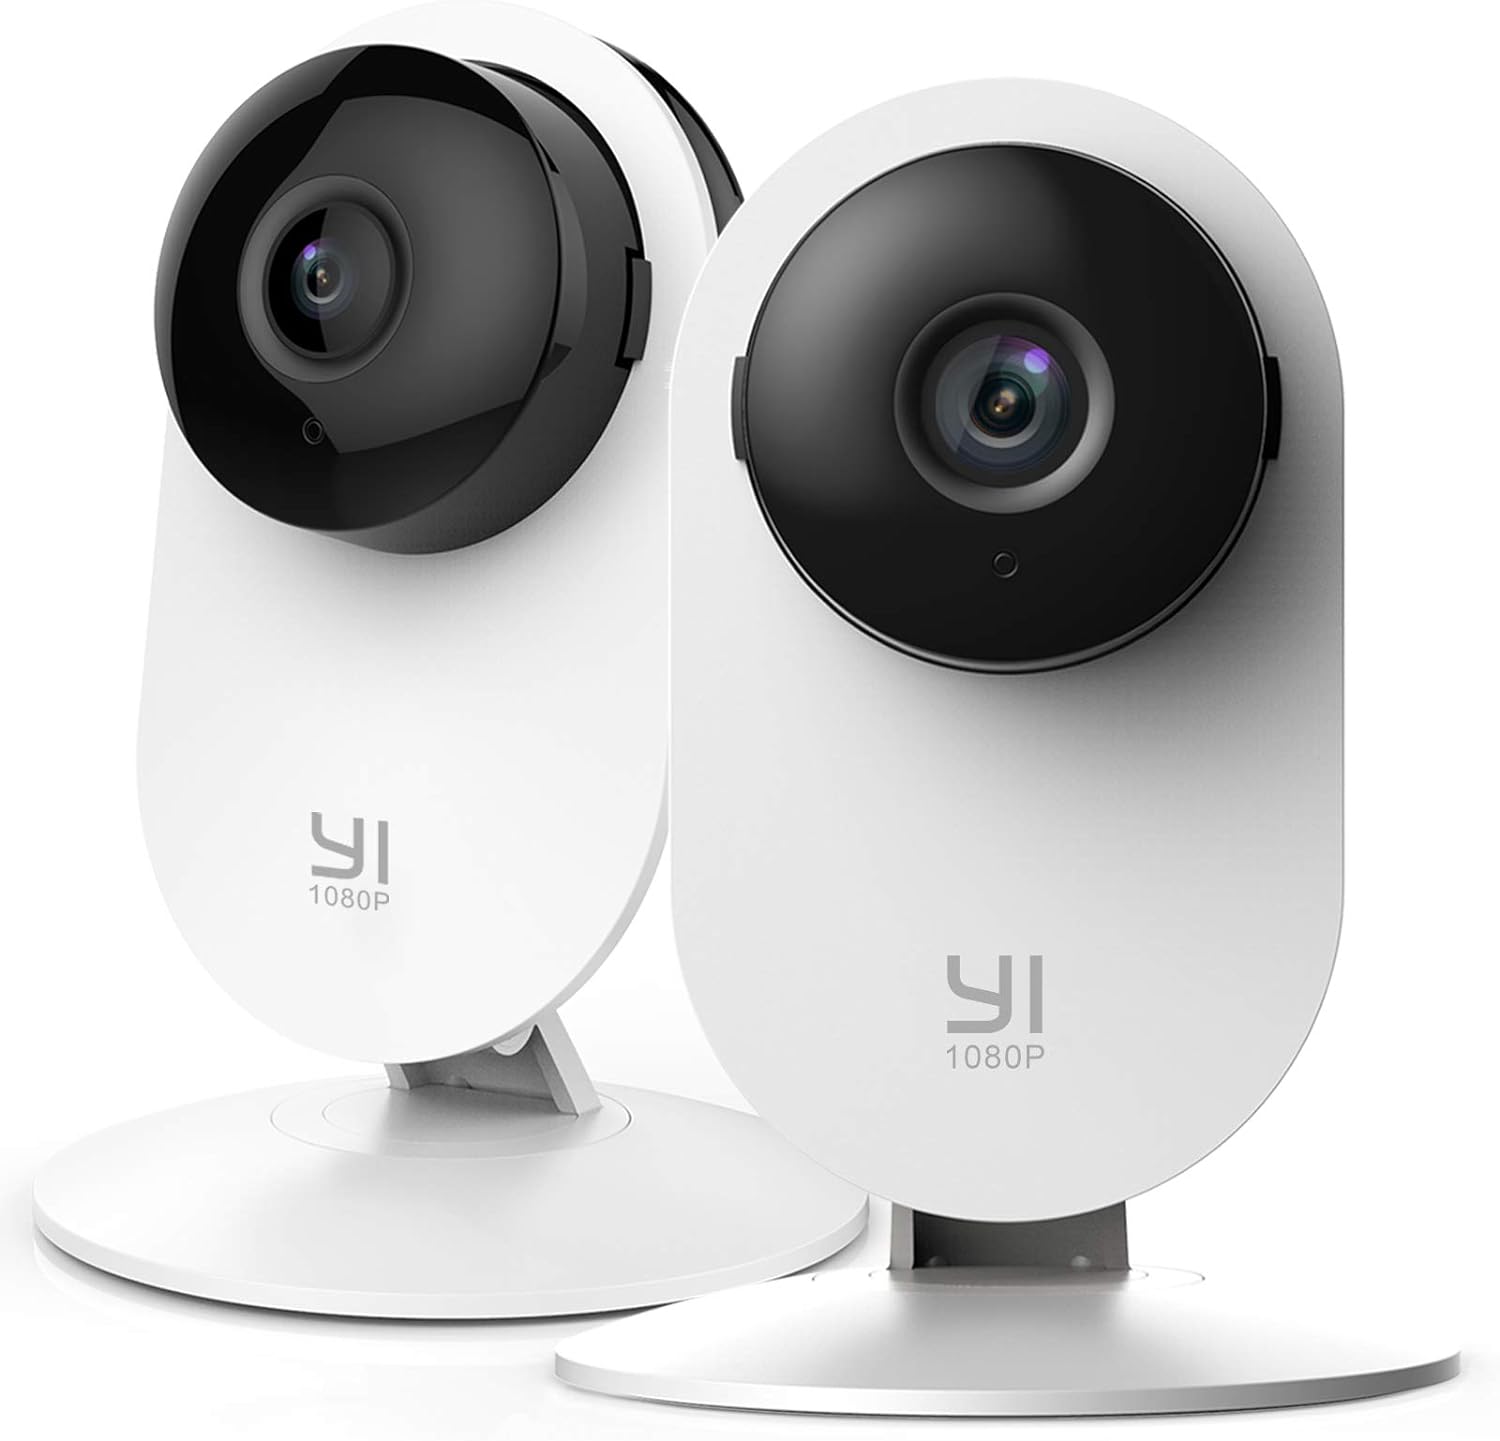 Save 60% on YI Smart Security Camera 1080p - Limited Offer